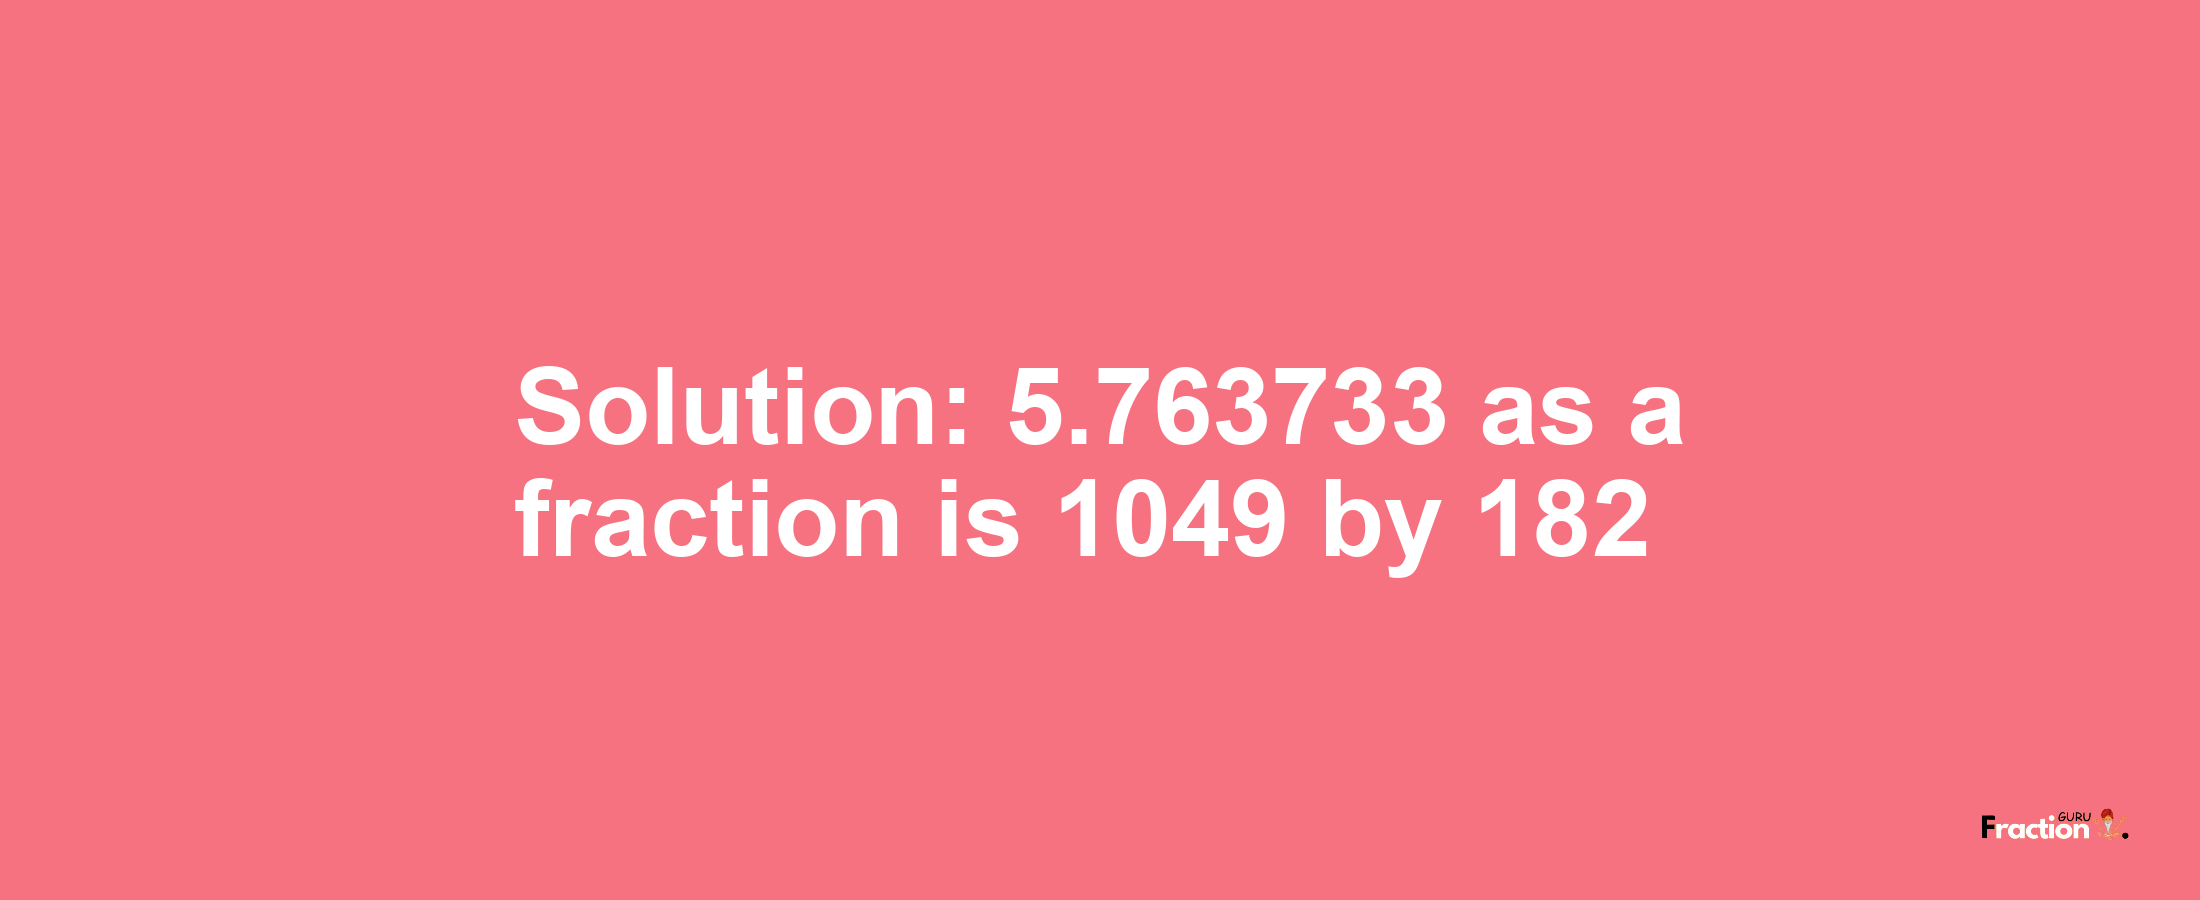 Solution:5.763733 as a fraction is 1049/182